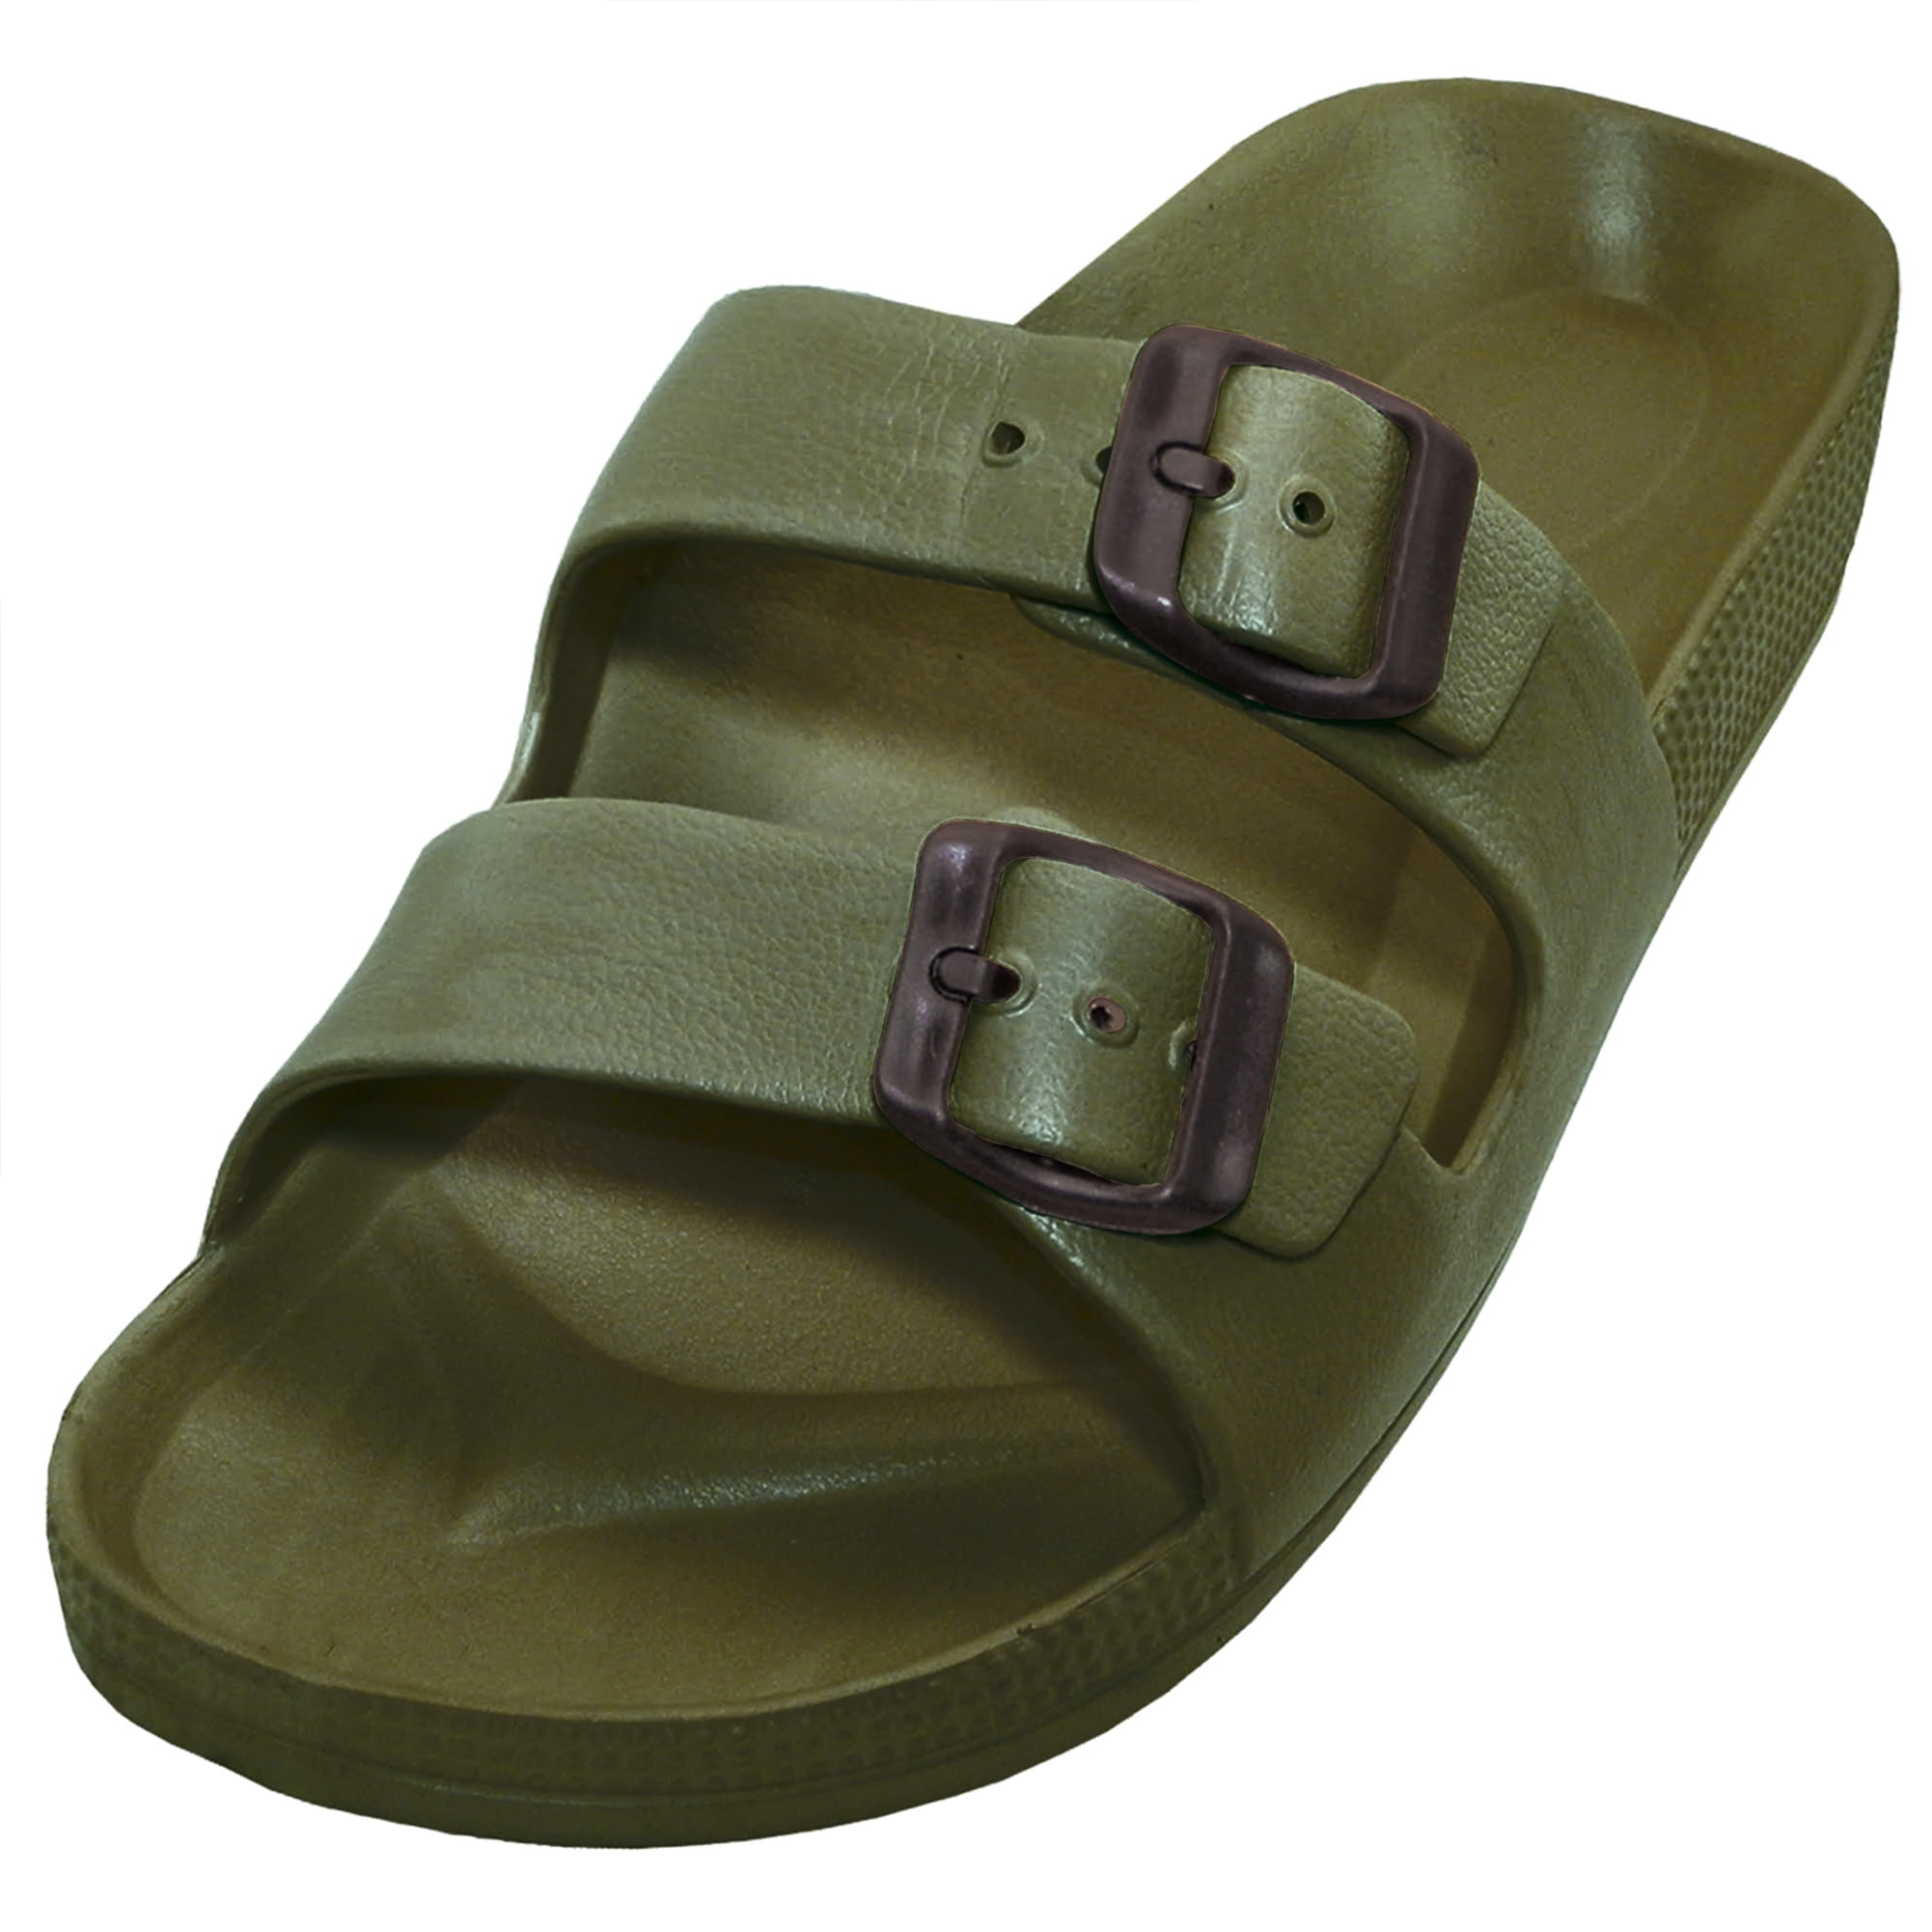 Levi's Men's Sandals June Perf Slides Fashion Summer Beach Shoes Army Green New 